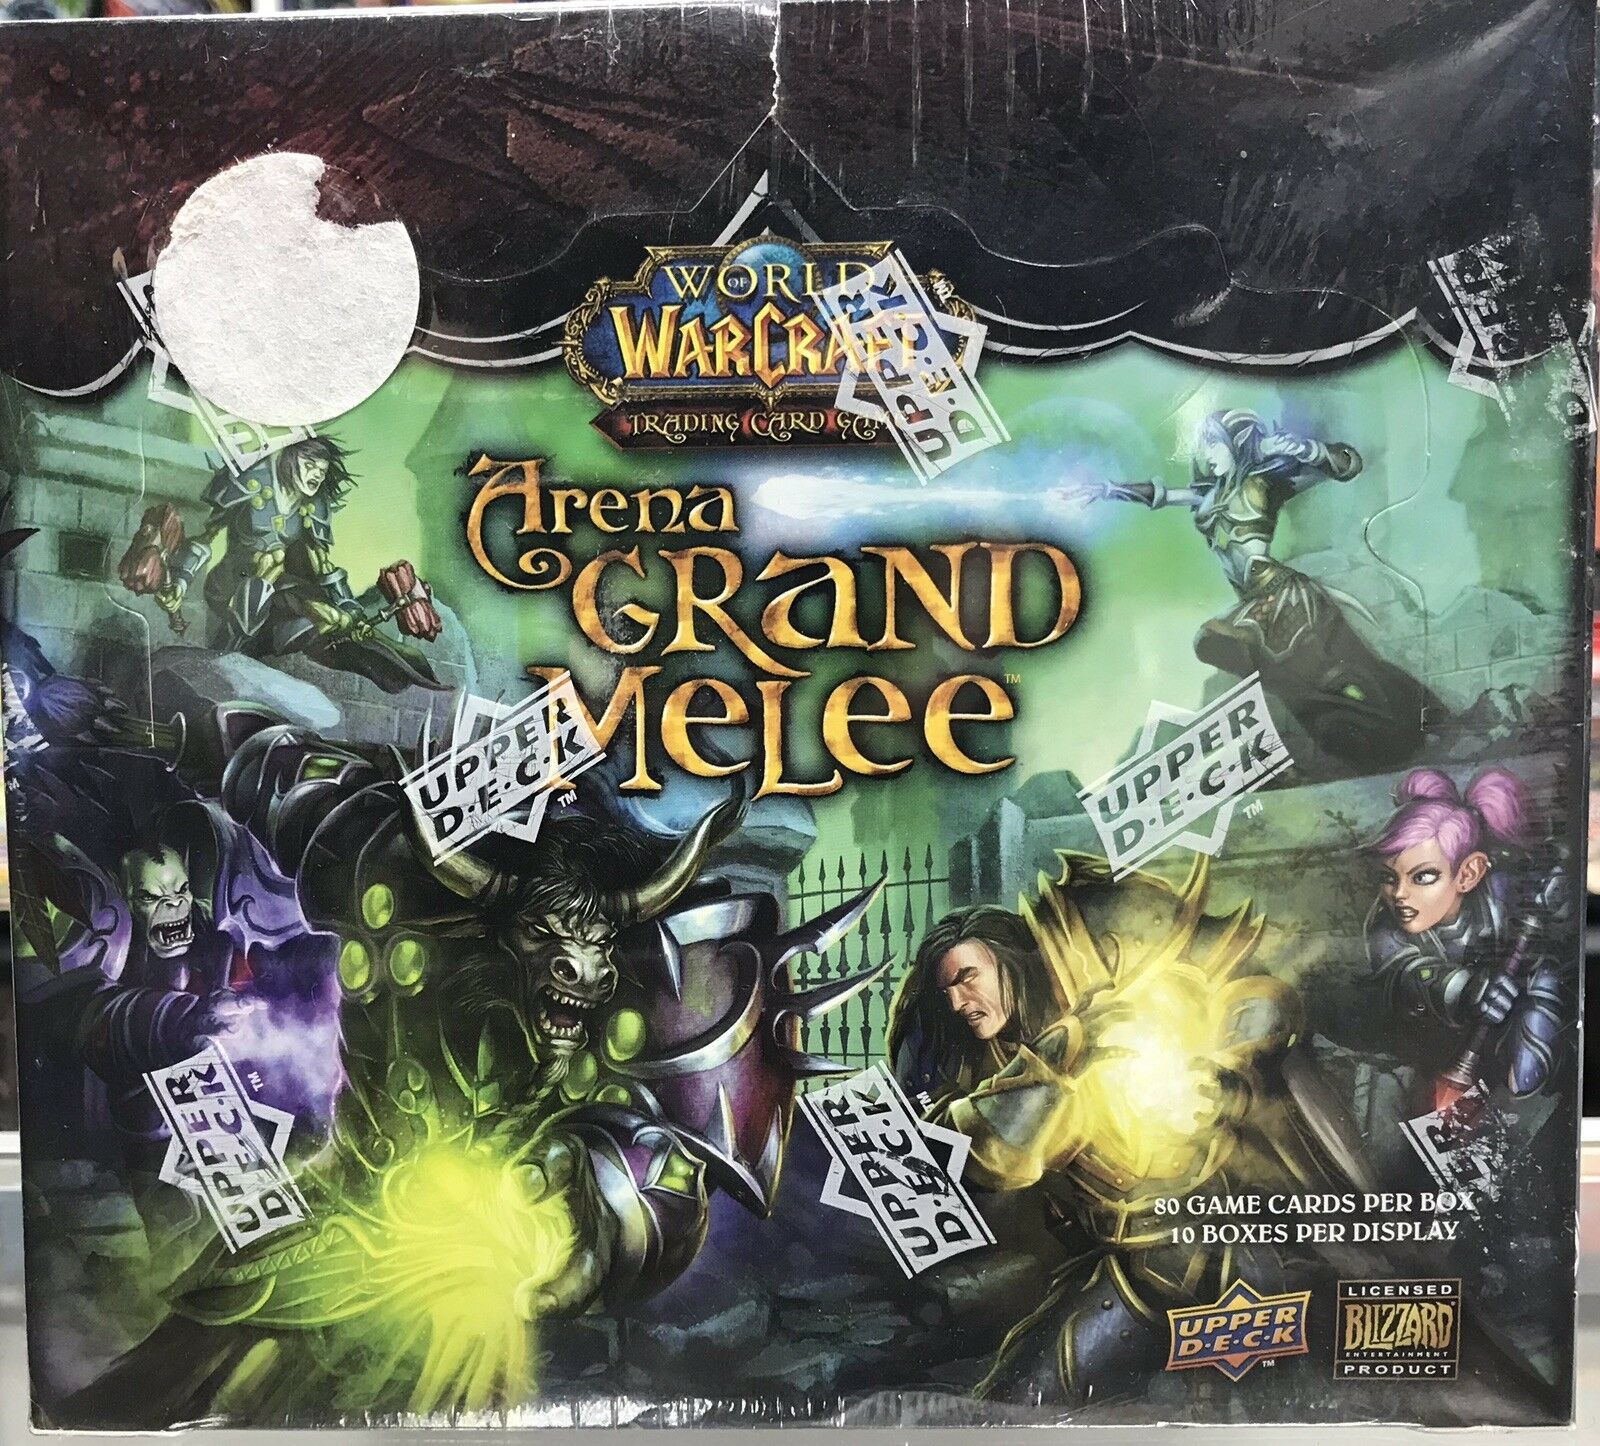 World of Warcraft TCG Arena Grand Melee Box